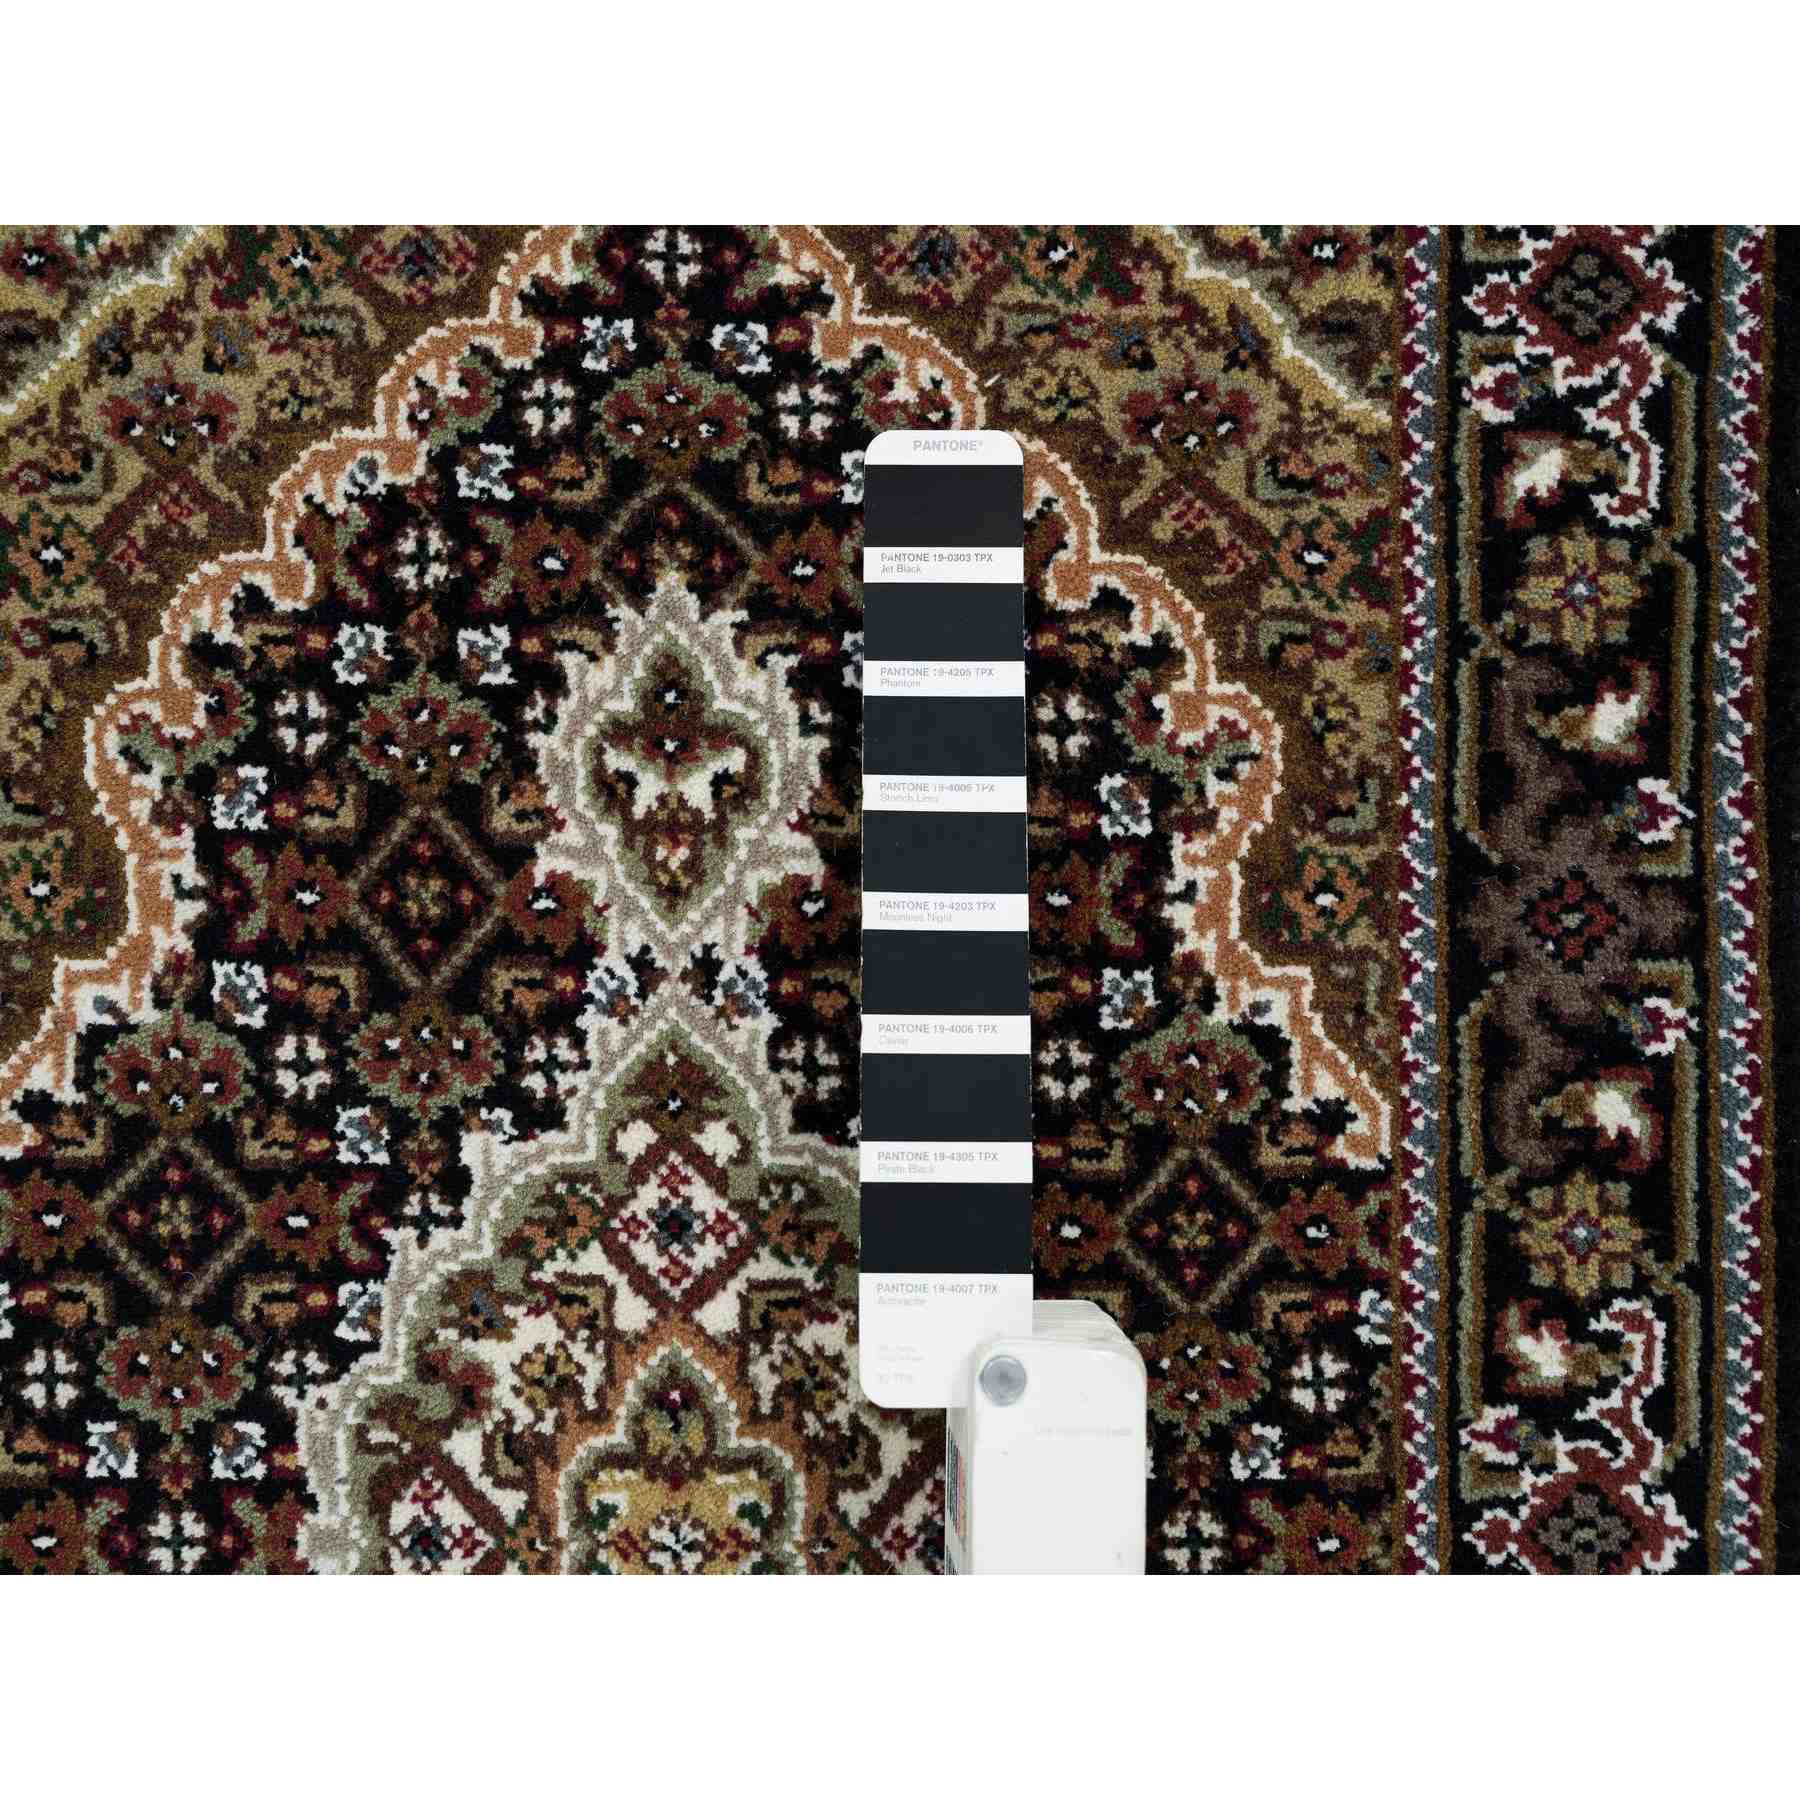 Fine-Oriental-Hand-Knotted-Rug-325380